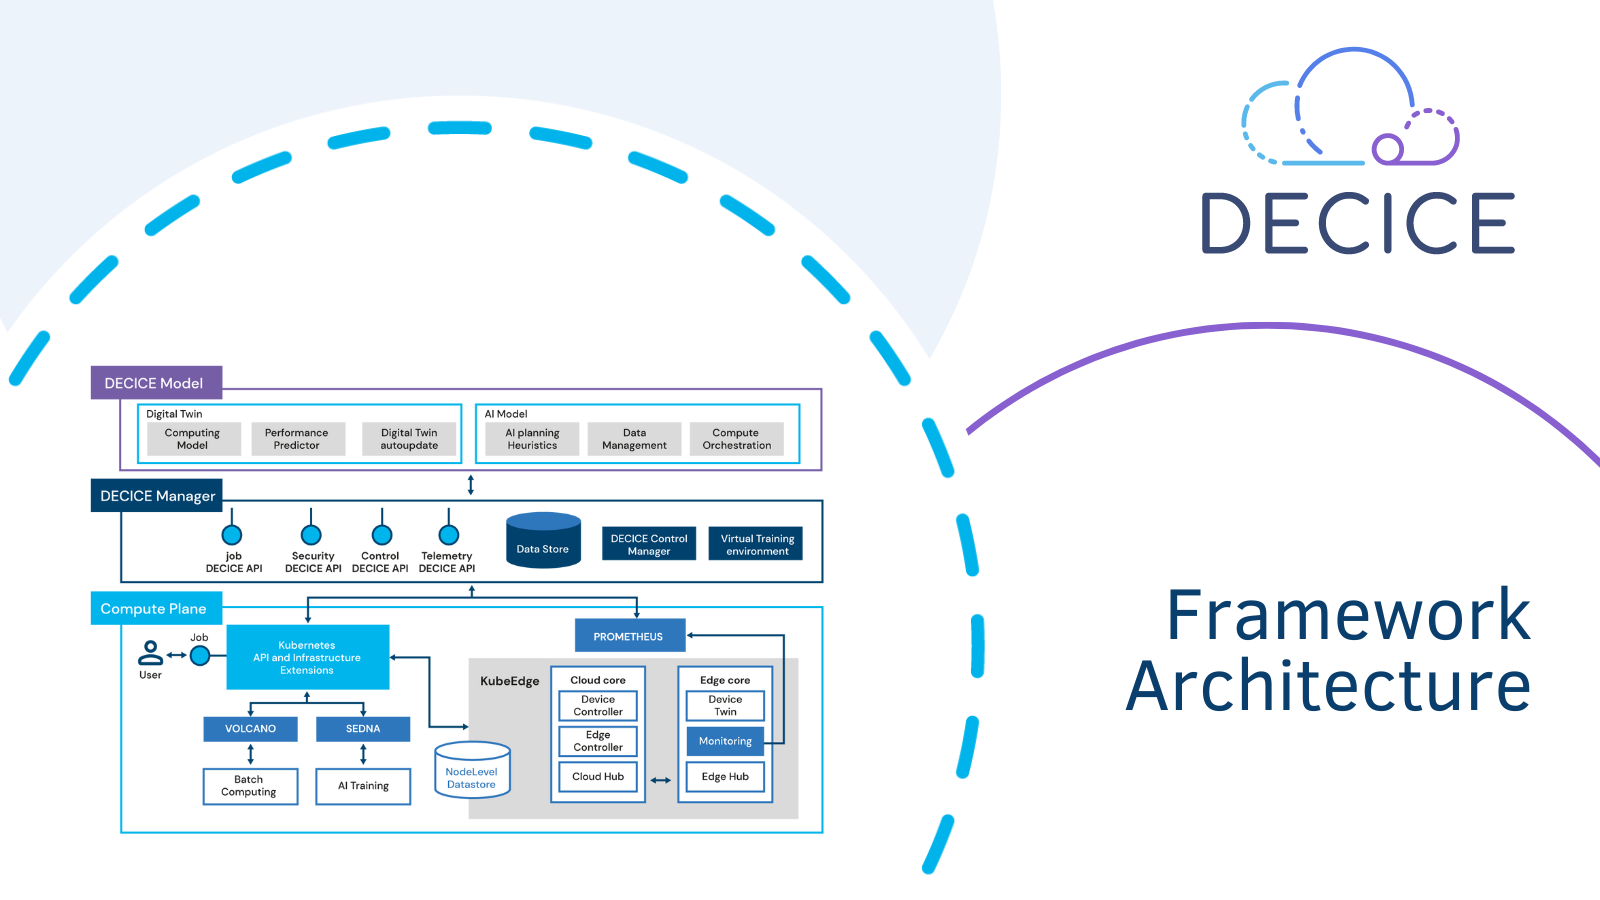 The DECICE Framework Architecture is structured into three major planes, the Compute Plane, the DECICE Manager and the DECICE model.